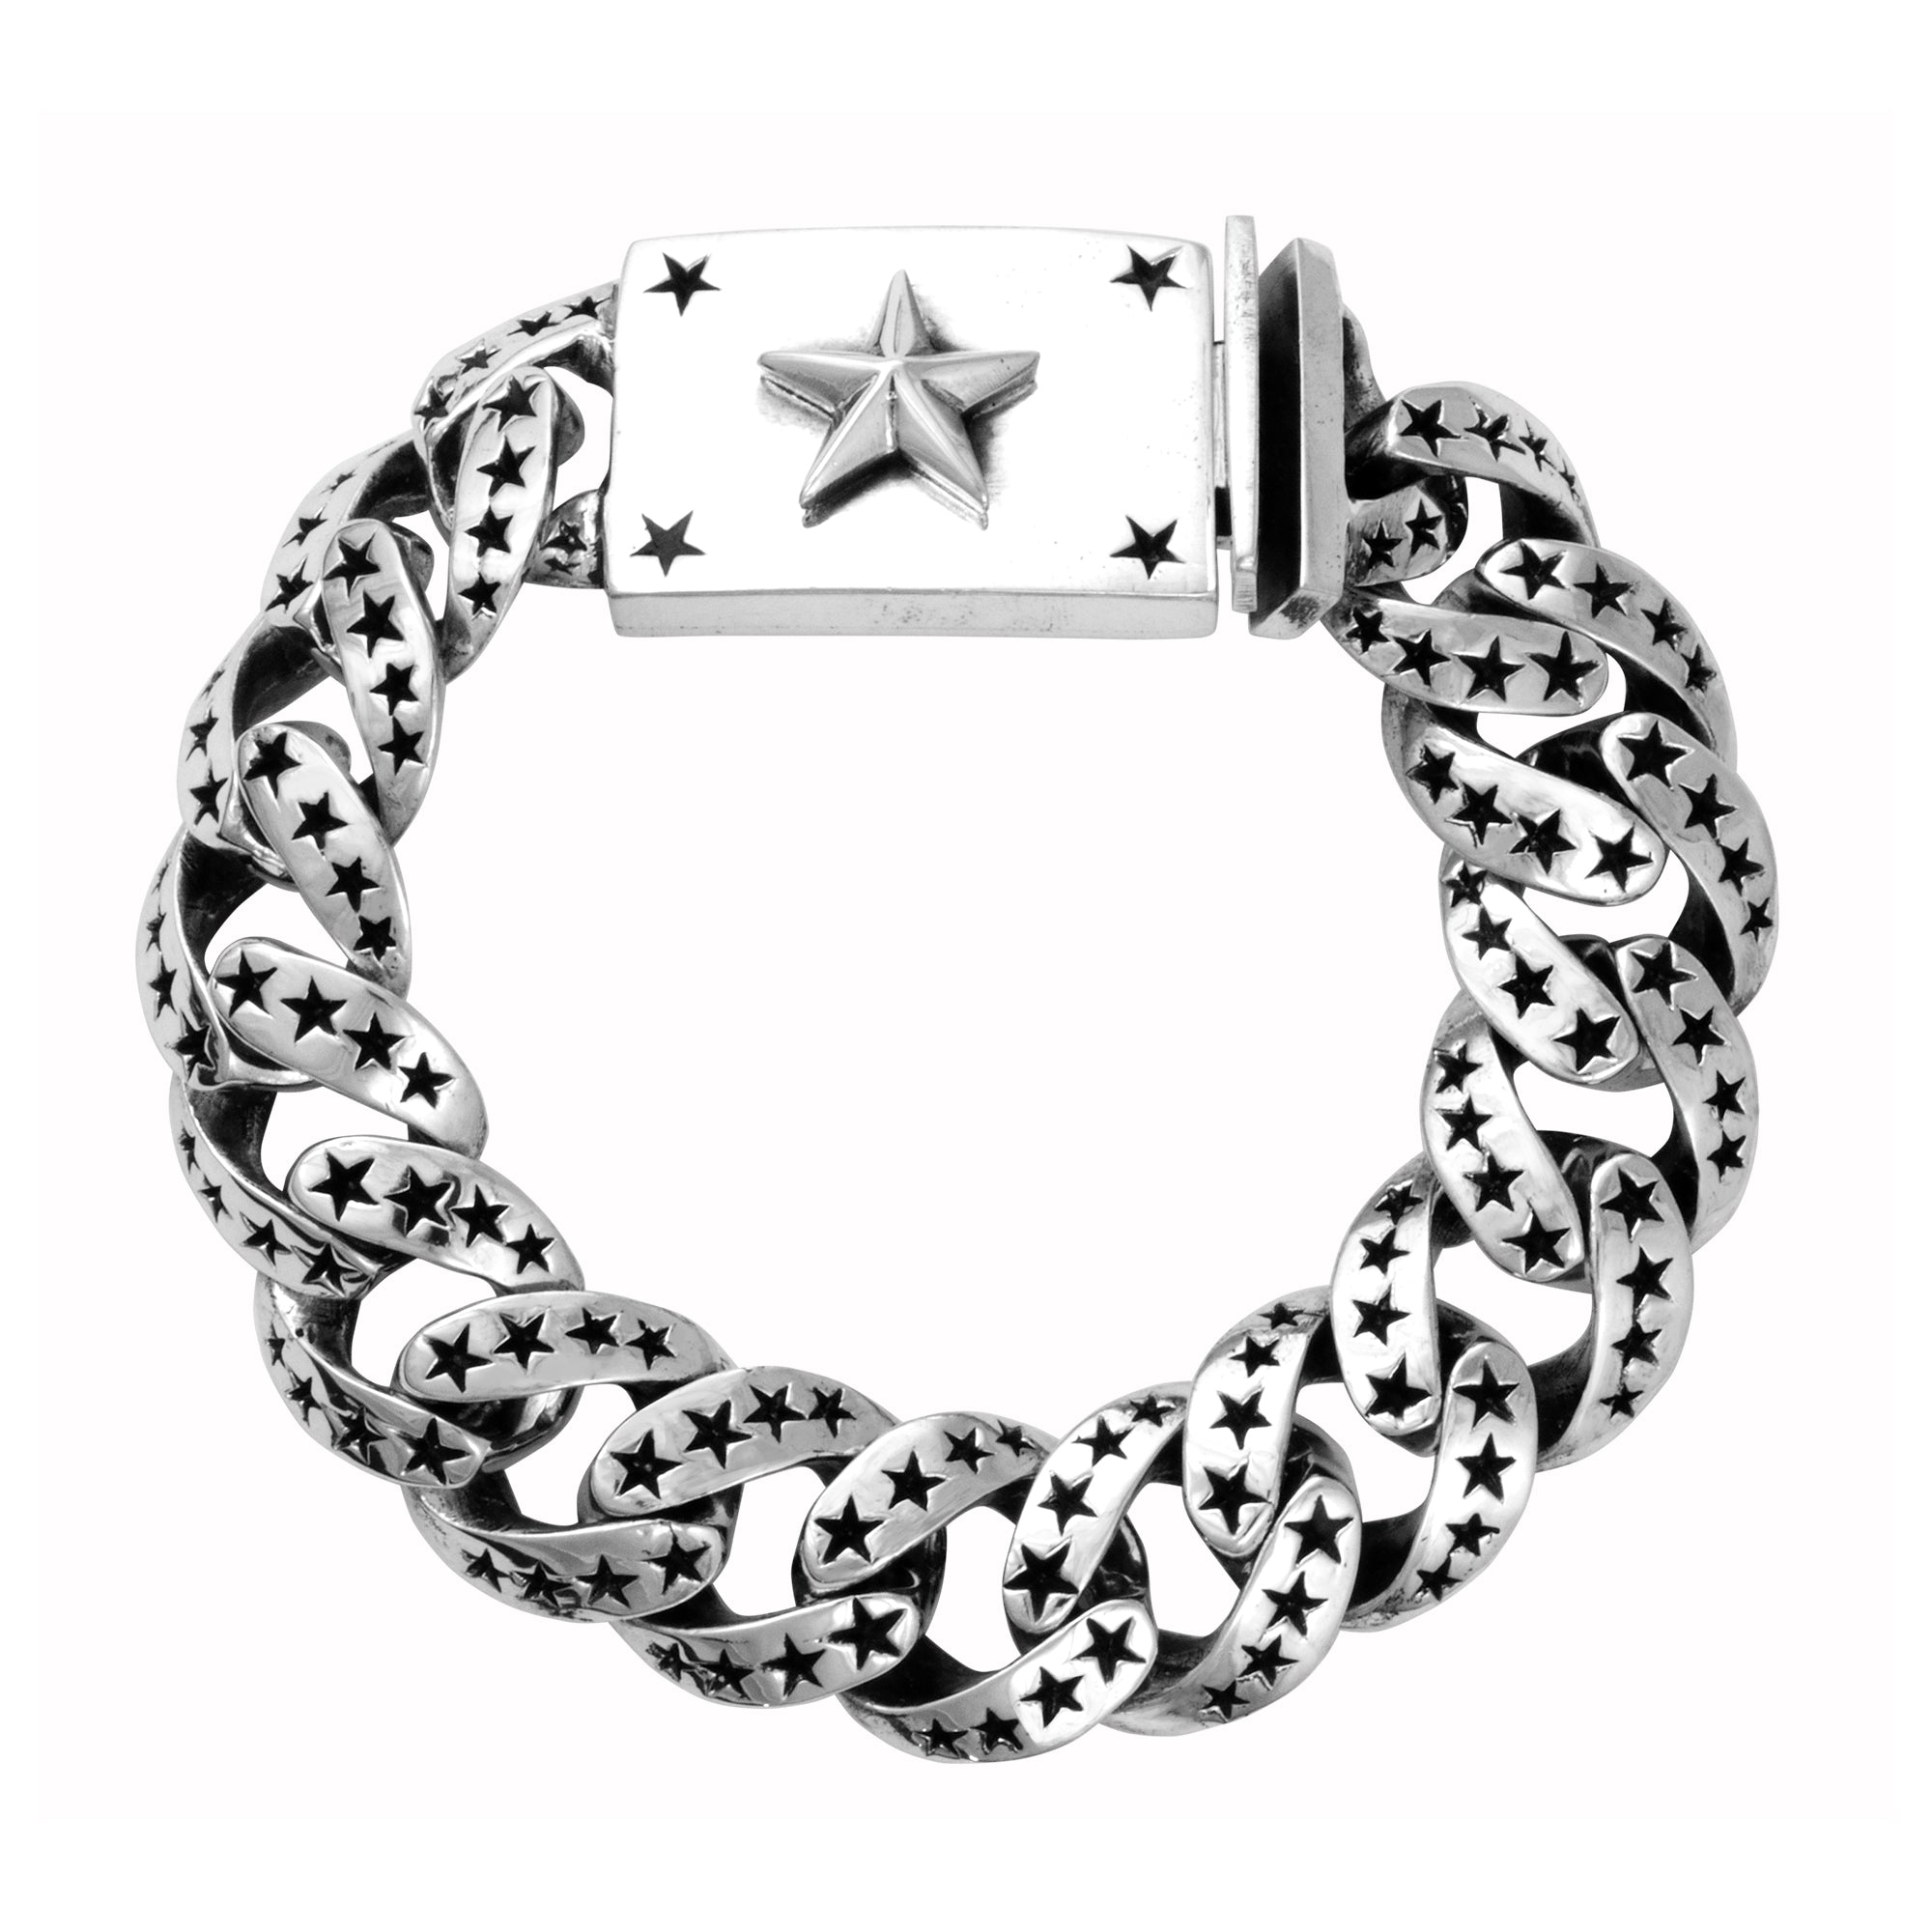 NEW STARS Men's Sterling Link Bracelet With Star Clasp by King Baby